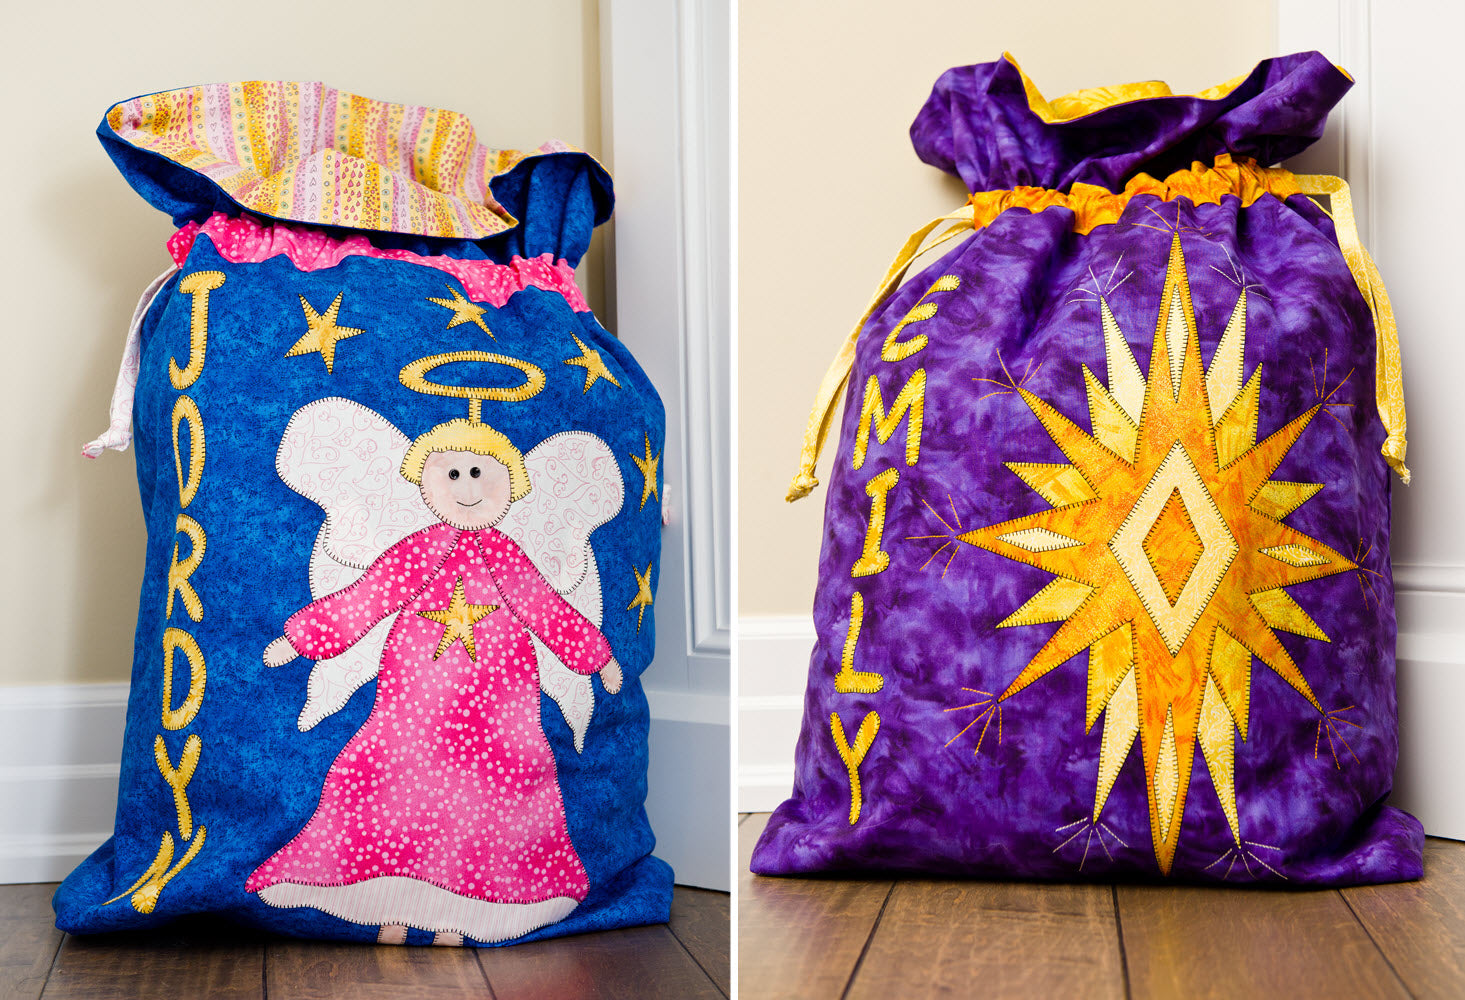 quilt pattern for personalized angel and star santa sacks.